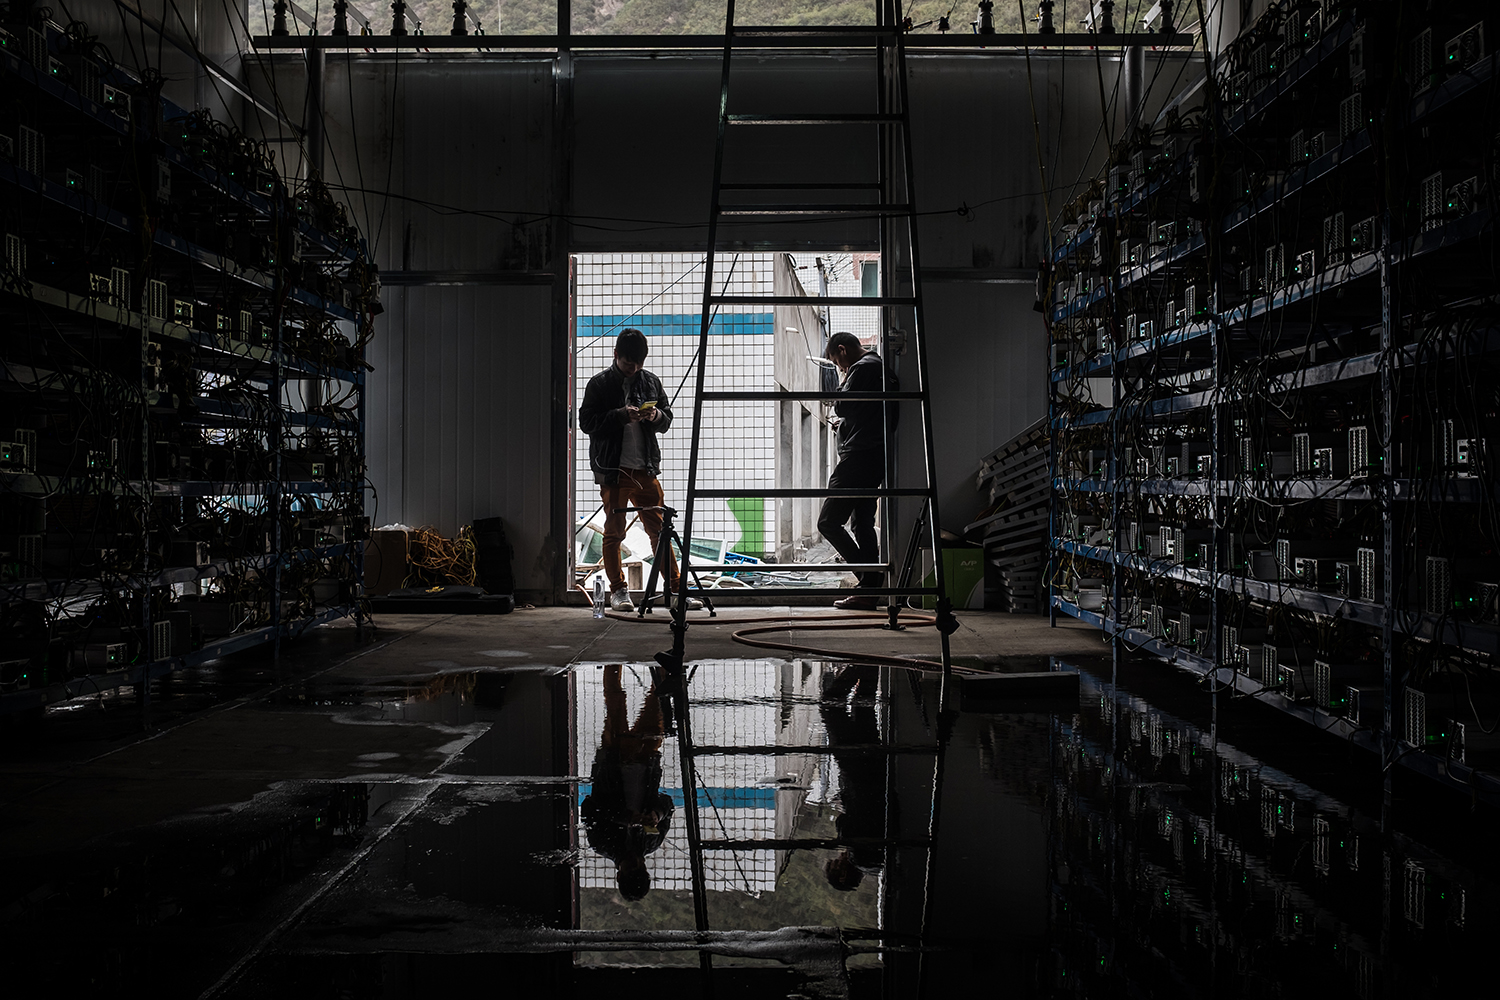 Employees use their phones at the Bitcoin mine, September 26, 2016. The mine has 550 “mining machines” running continuously. They solve complicated mathematical problems for which they are rewarded with Bitcoins. Seven employees work in shifts monitoring the machines to keep the mine running 24 hours a day.